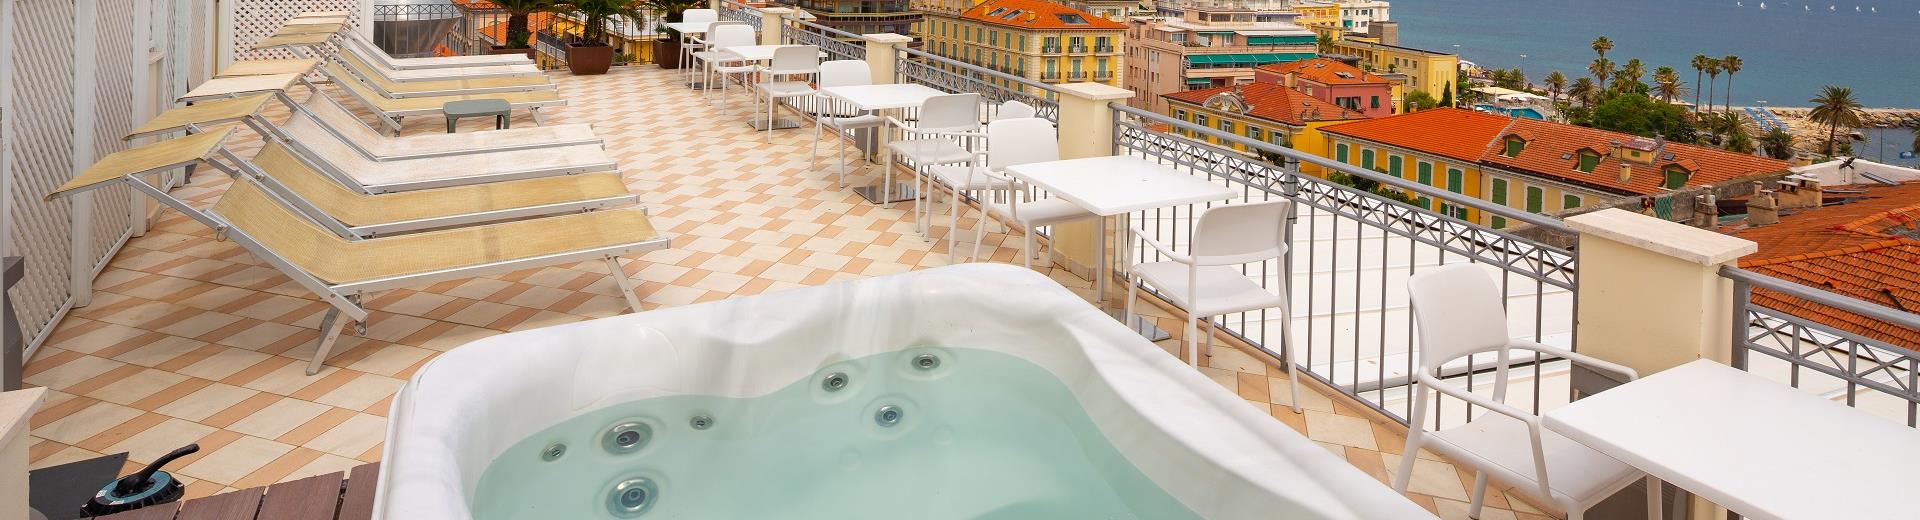 Relax in the rooftop terrace of our Sanremo hotel with jacuzzi